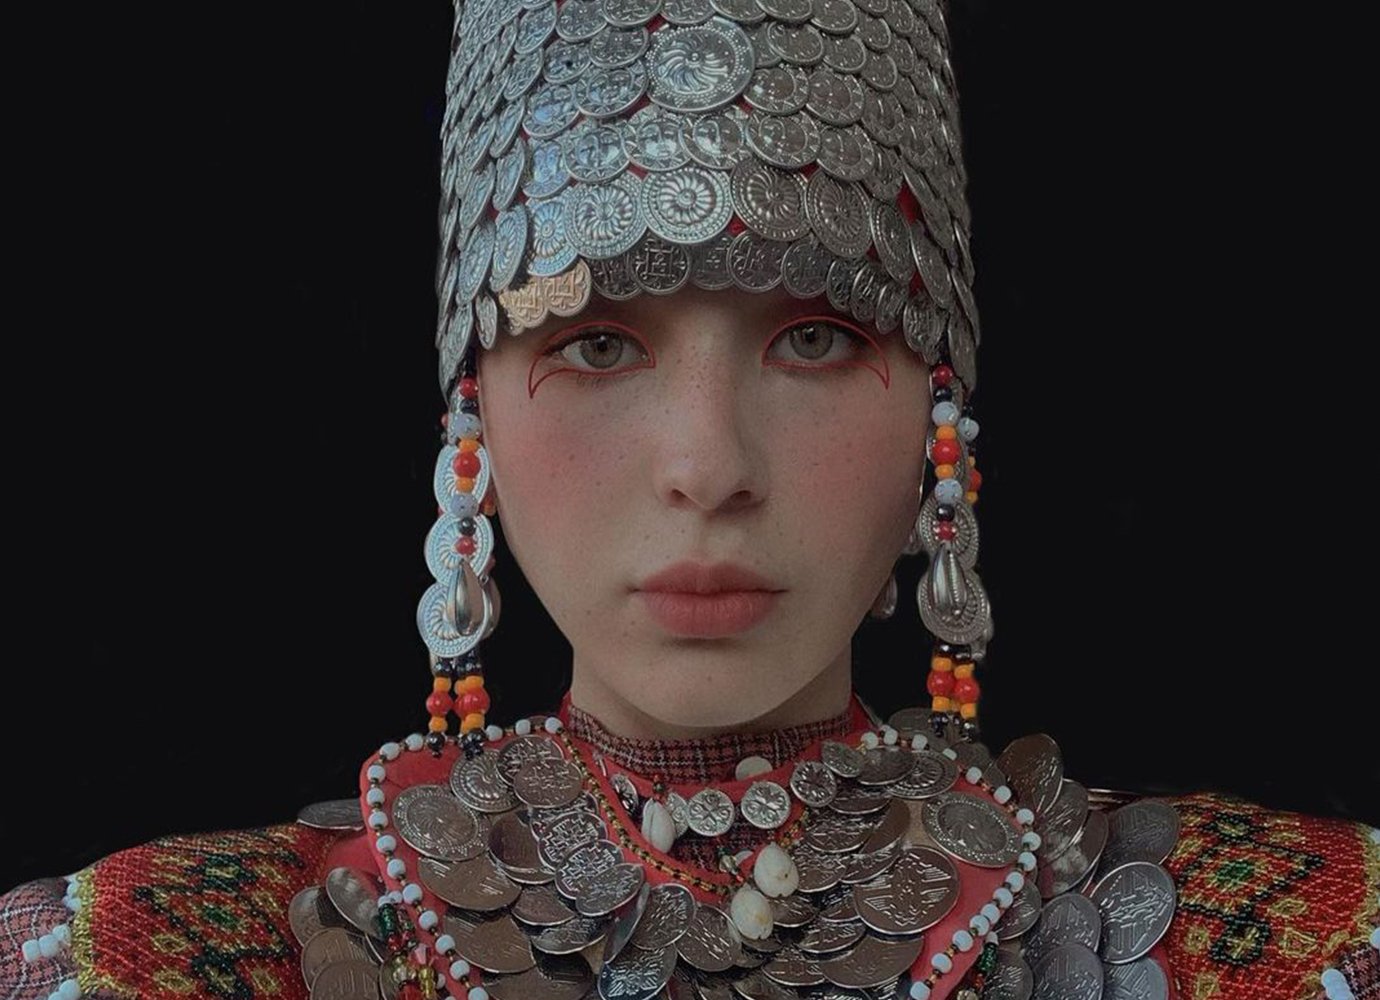 Gen Z’s Polina Osipova is reimagining Russia’s indigineous cultures for a digital age